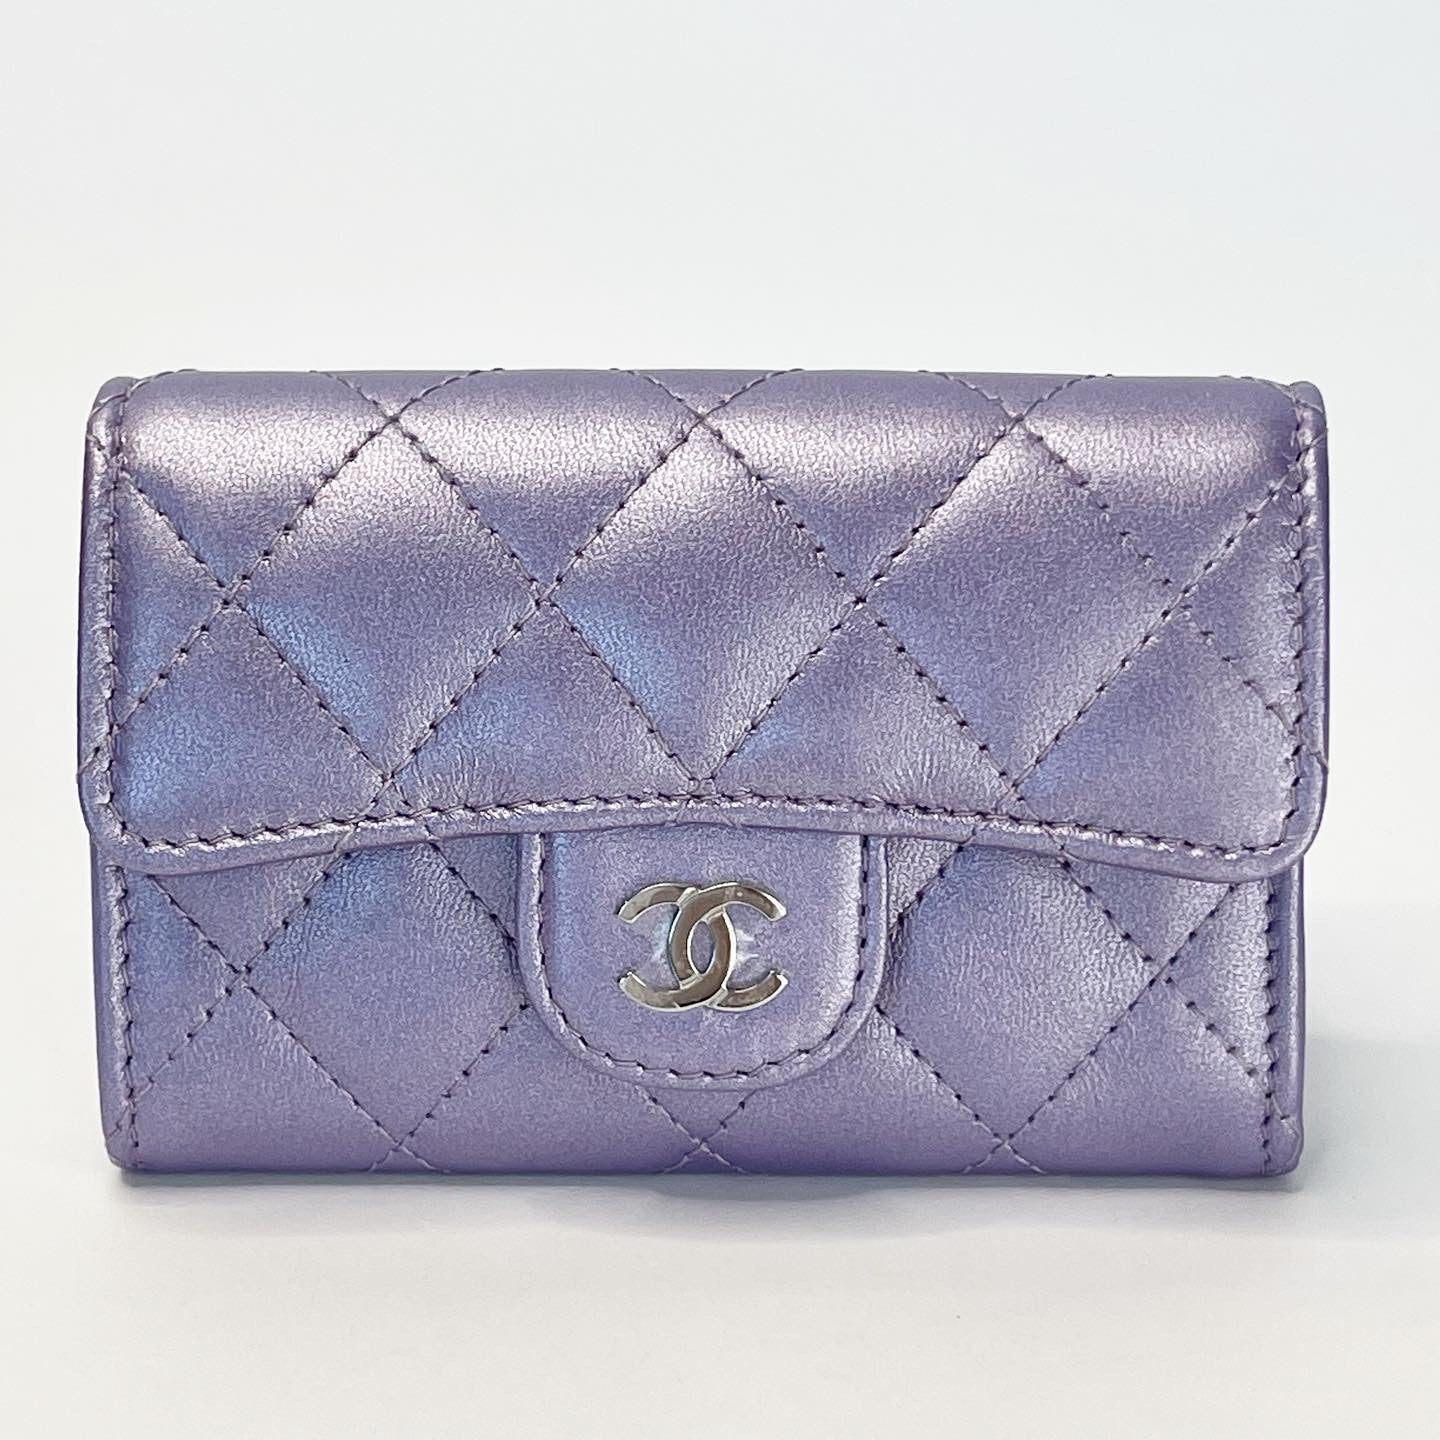 CHANEL CLASSIC FLAP CARD HOLDER IN IRRIDESCENT VIOLET CALFSKIN LEA